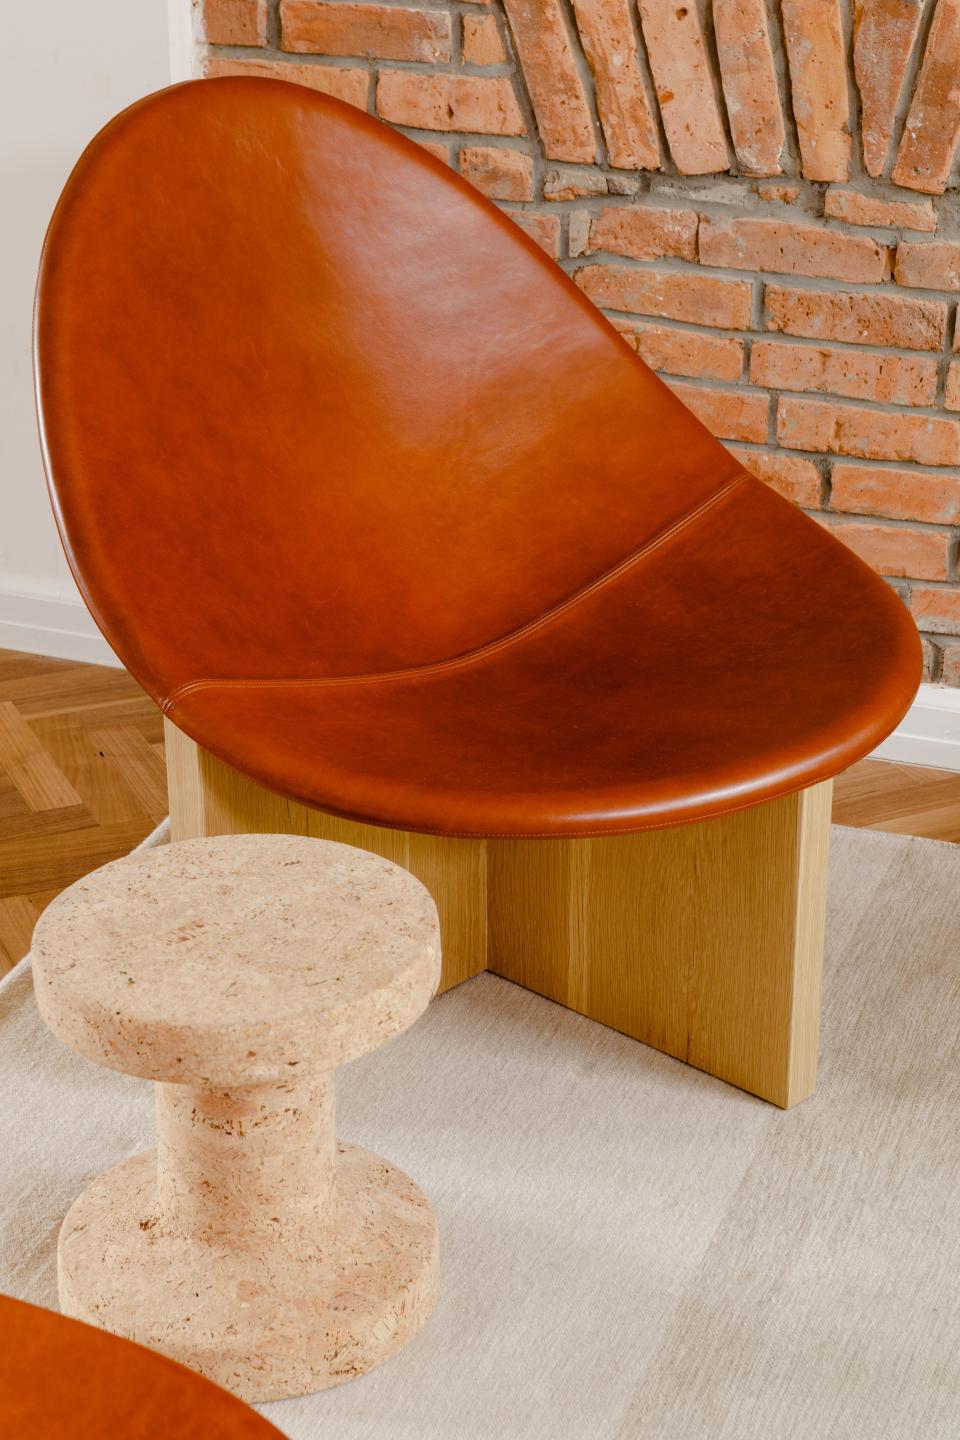 The Estudio Persona Nido Chairs were a splurge. “I really had to convince Chris,” Claire confesses. But their timeless shape and sculptural silhouette made them ideal for the transitional space, where they will be on view at all angles. The cork side tables are from Vitra.